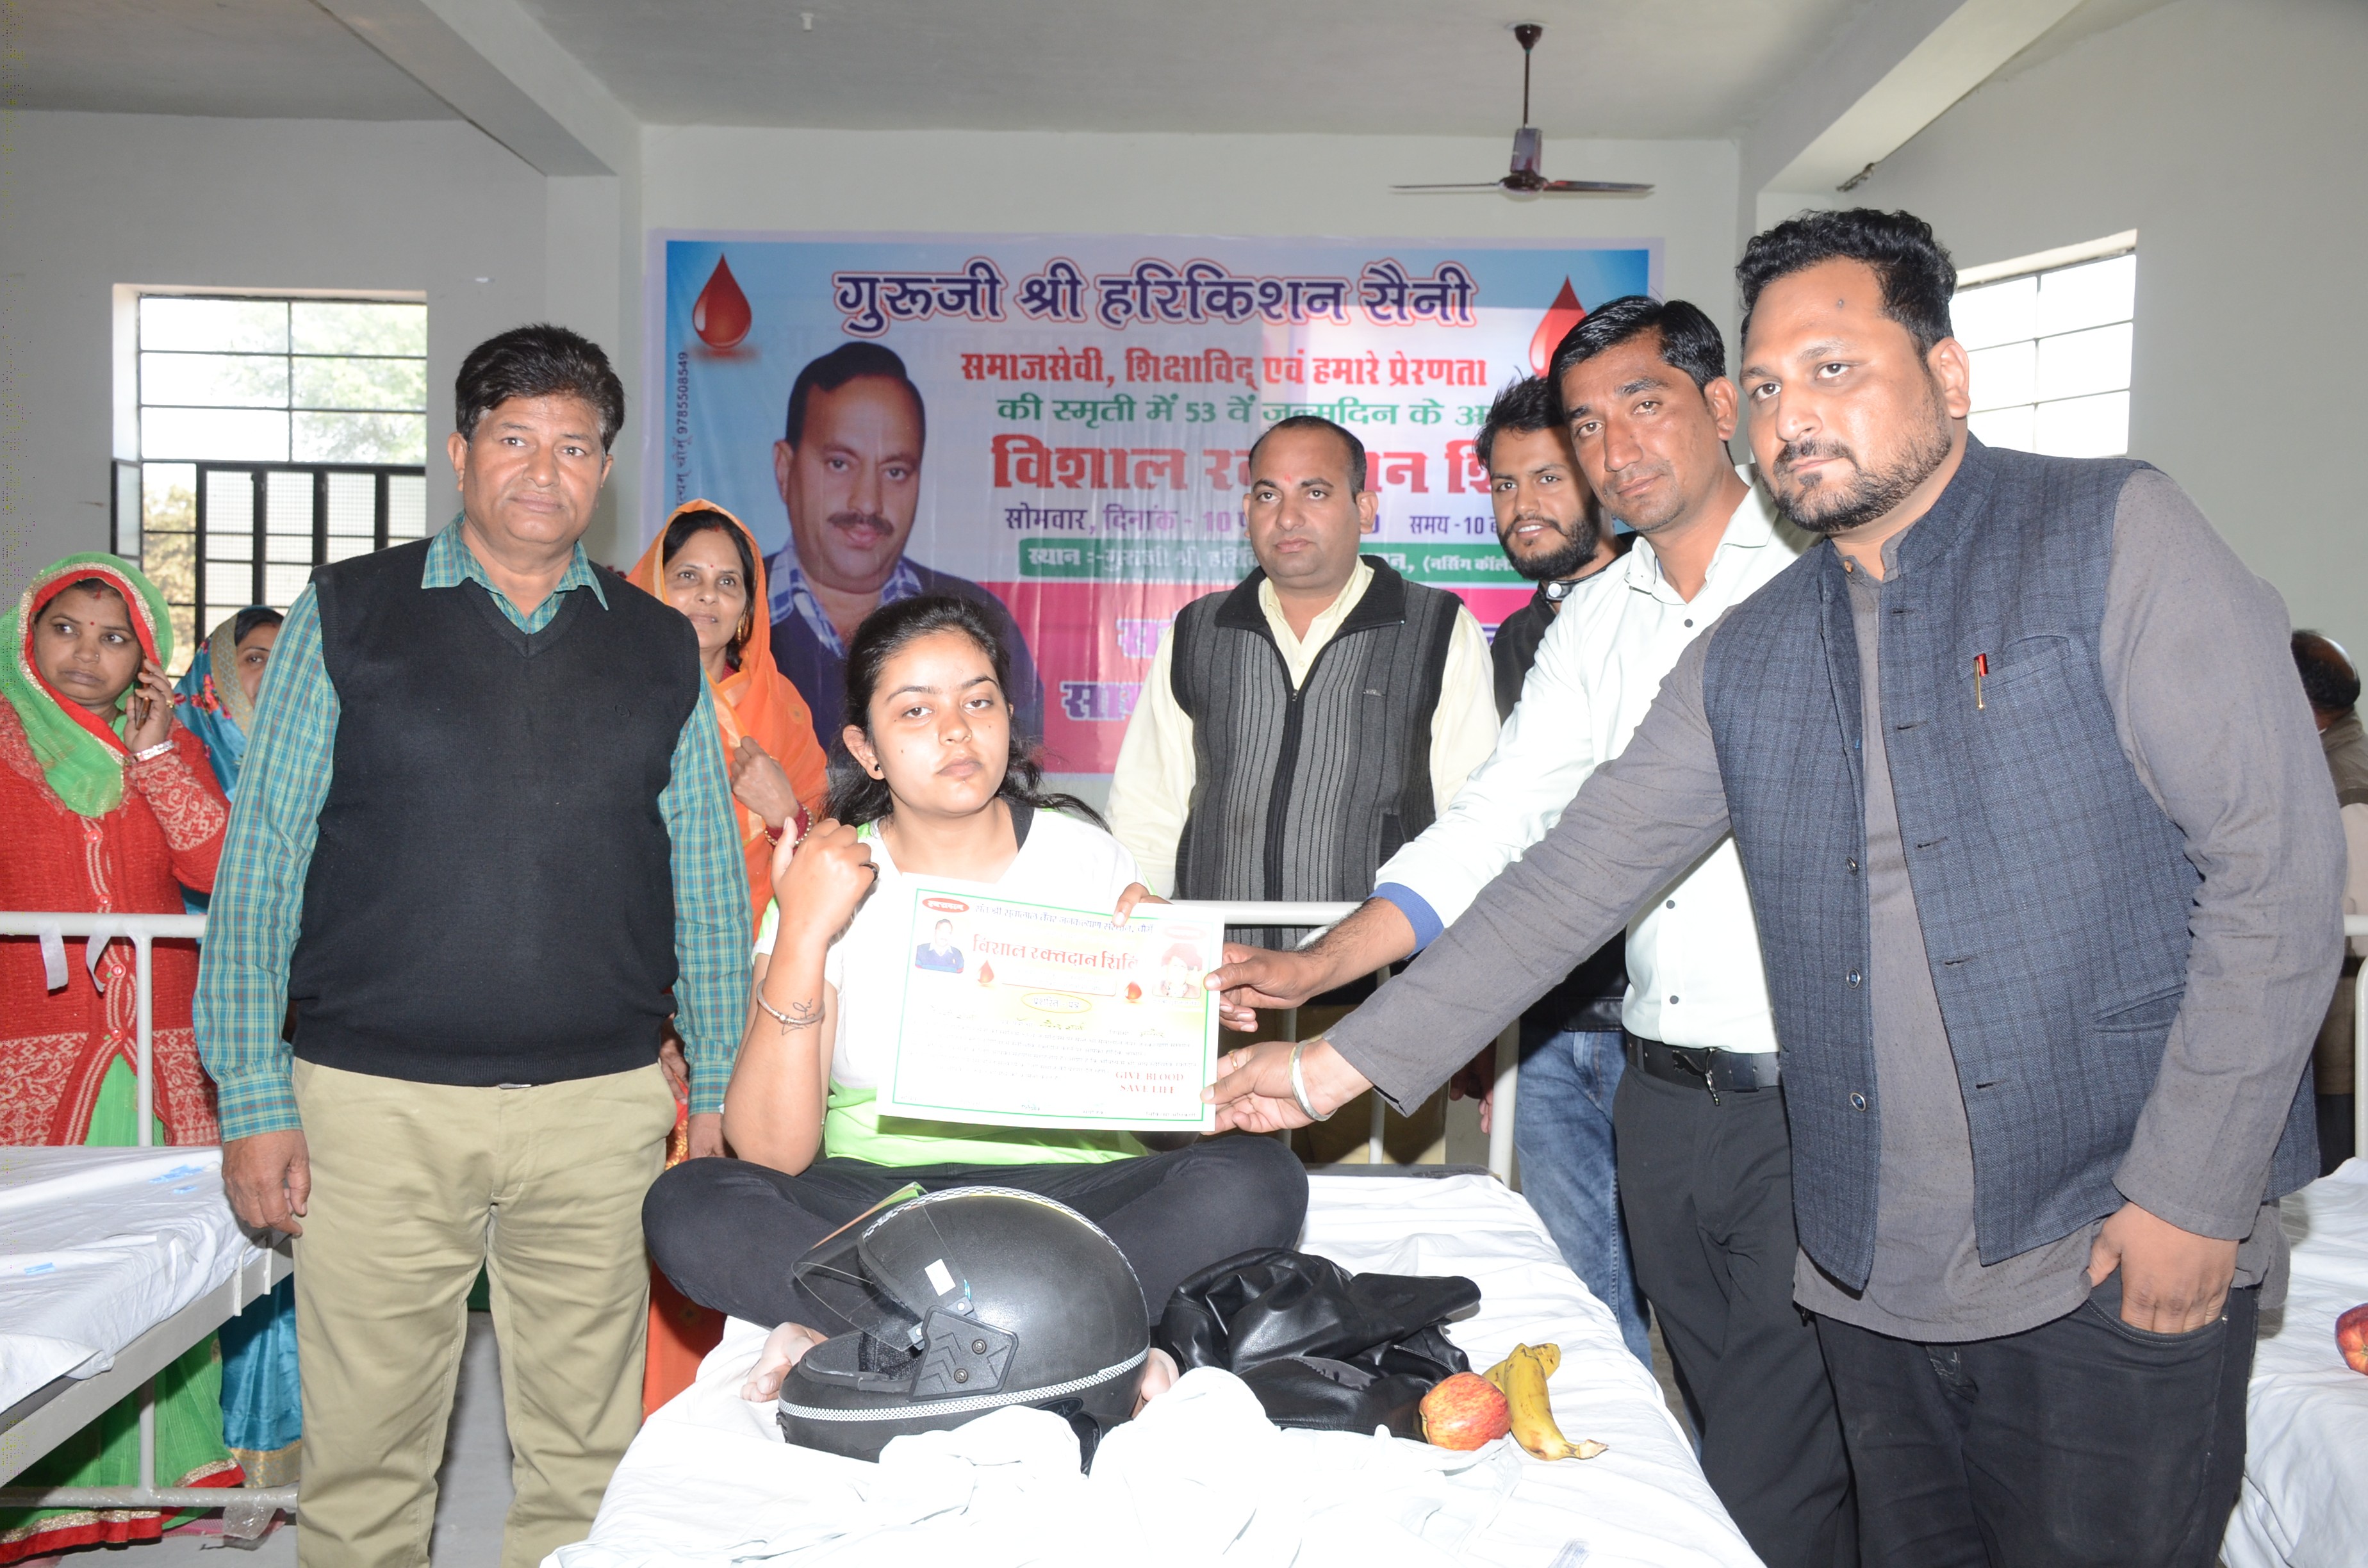 BLOOD DONATION CAMP 2020